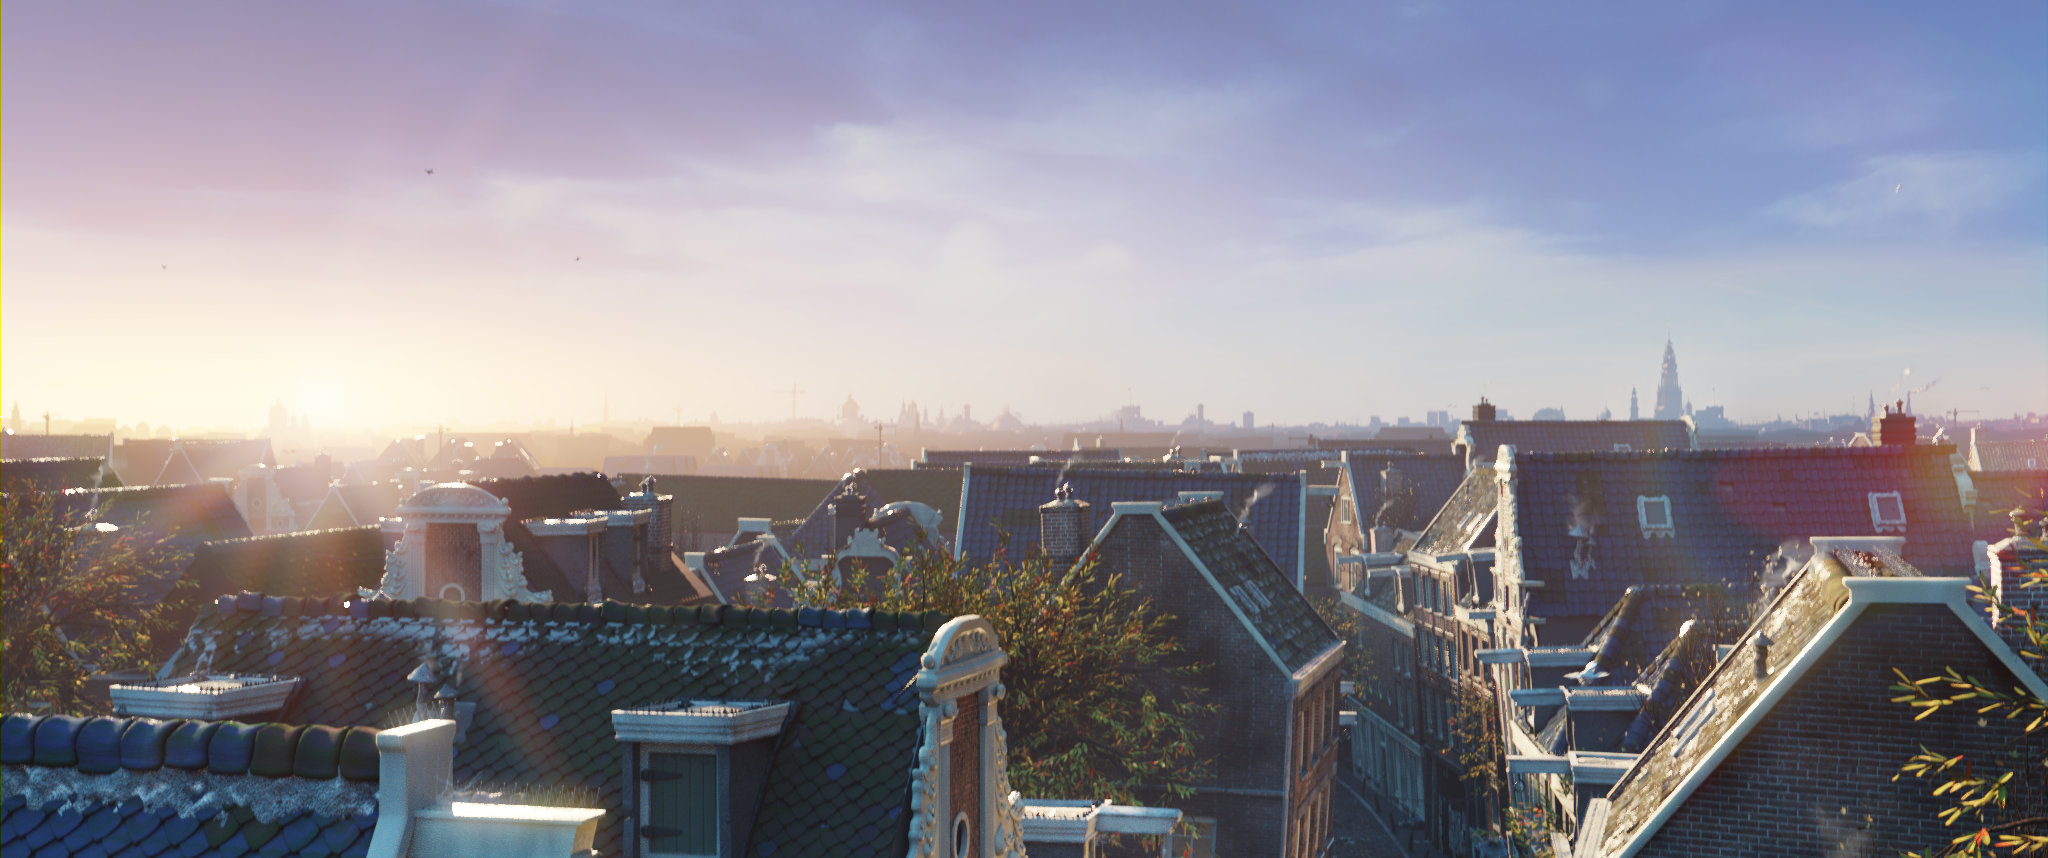 Still from Agent 327: view of Amsterdam.